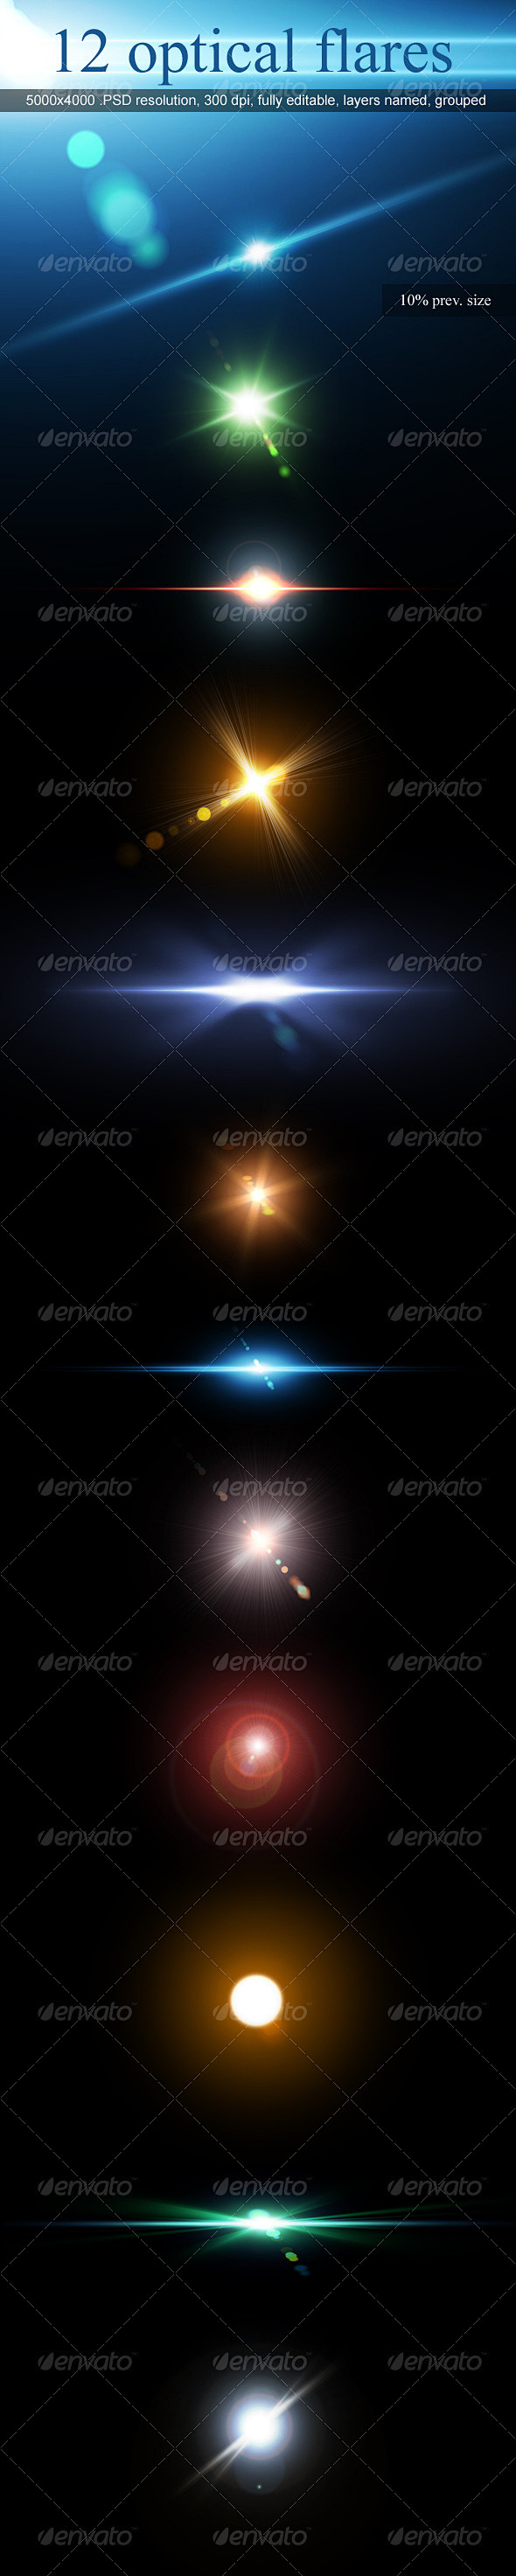 12 Optical Flares by...